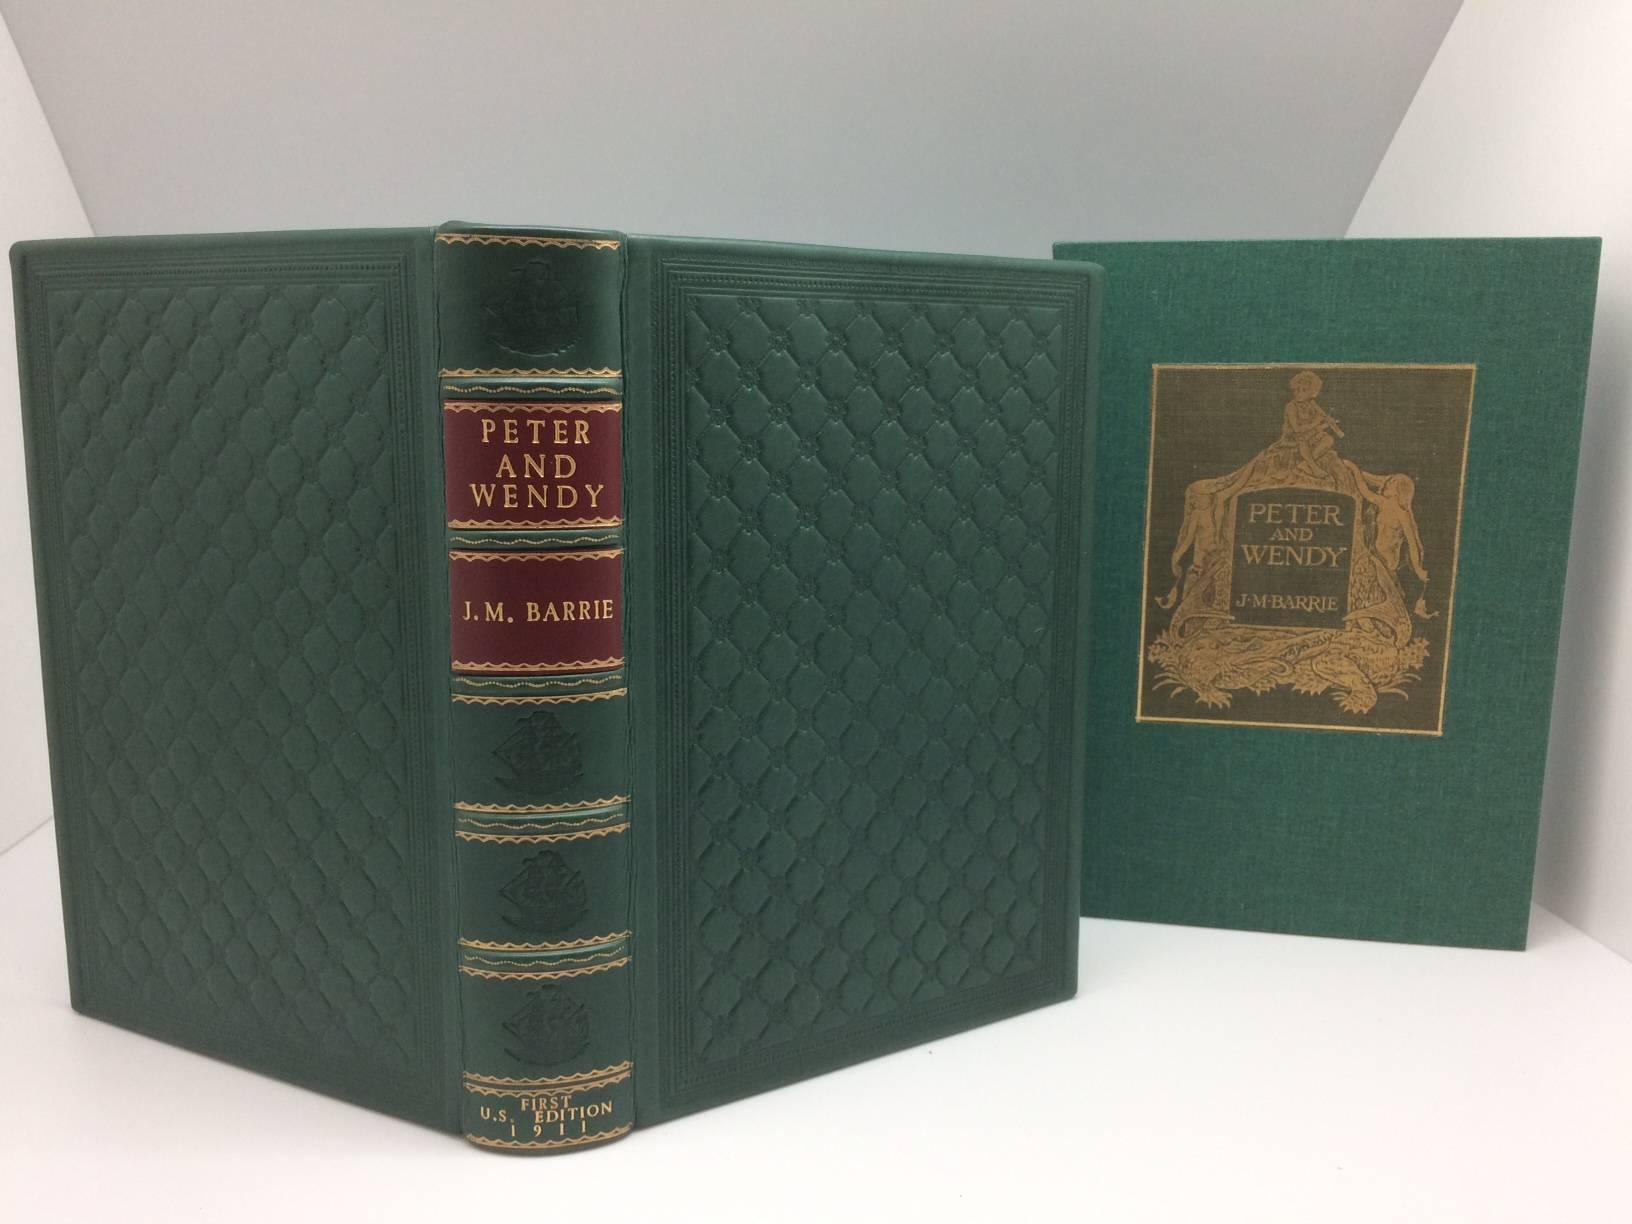 This is the earliest published American edition of the story of Peter Pan and Wendy.

The play, Peter Pan was performed in 1904, but was not issued in a trade edition until 1928.

This is a beautifully full-calf bound American first edition with